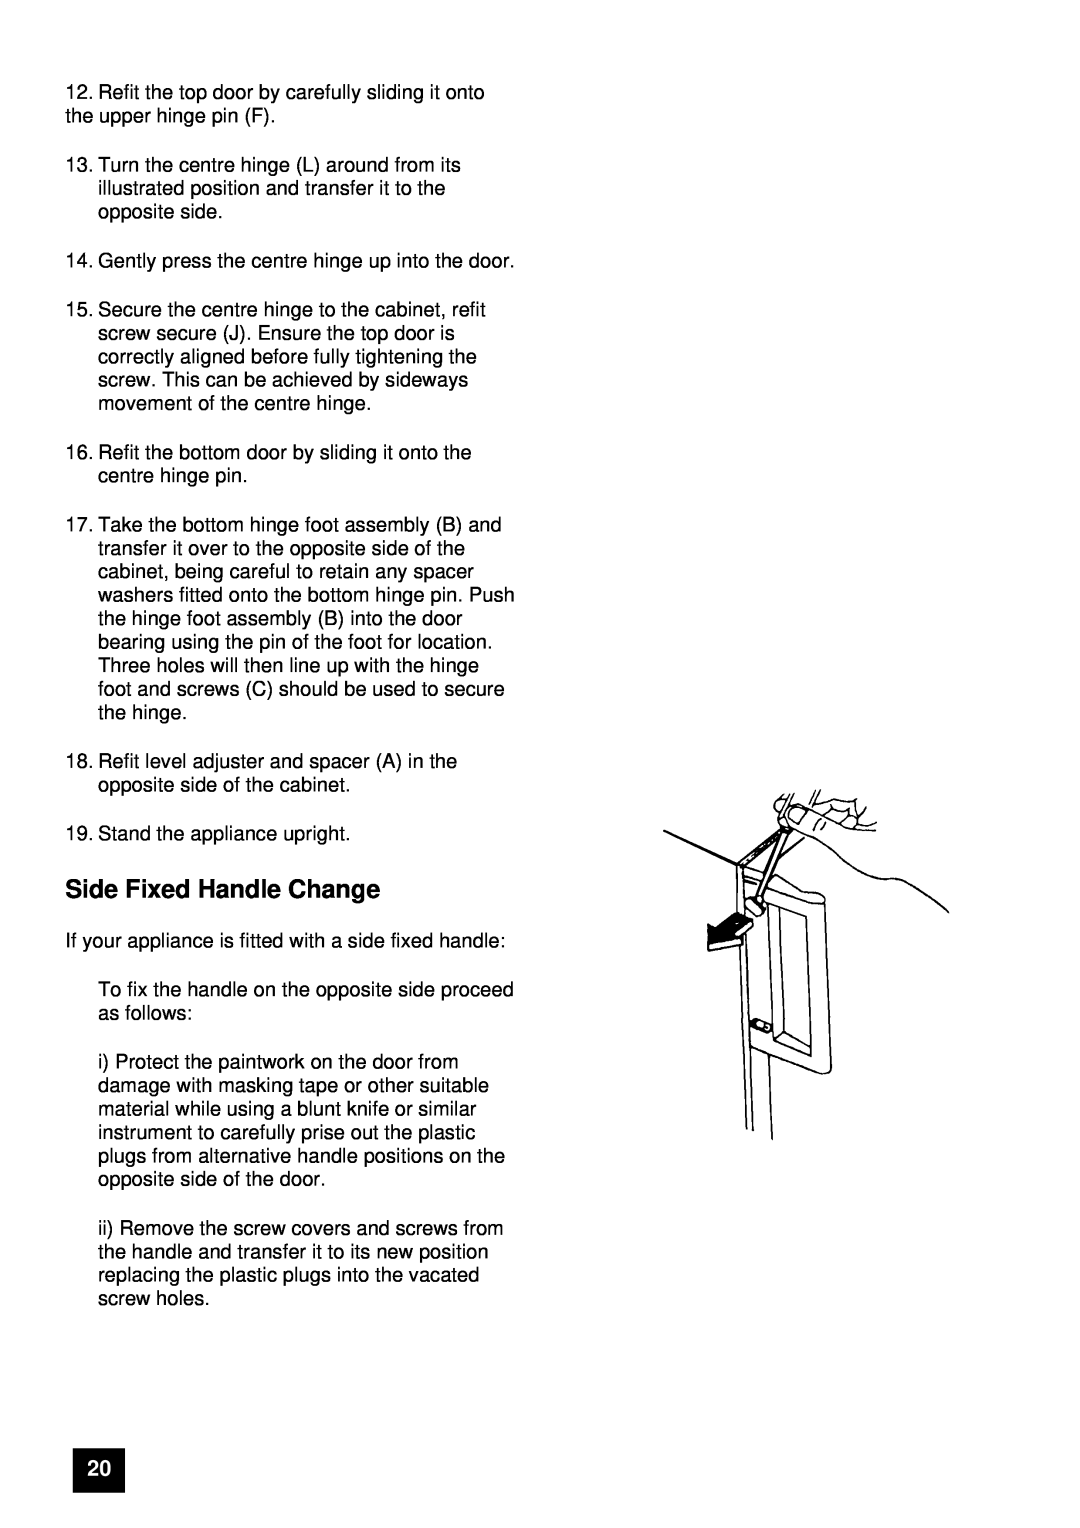 Tricity Bendix FD806W, ECD806 instruction manual Gently press the centre hinge up into the door 